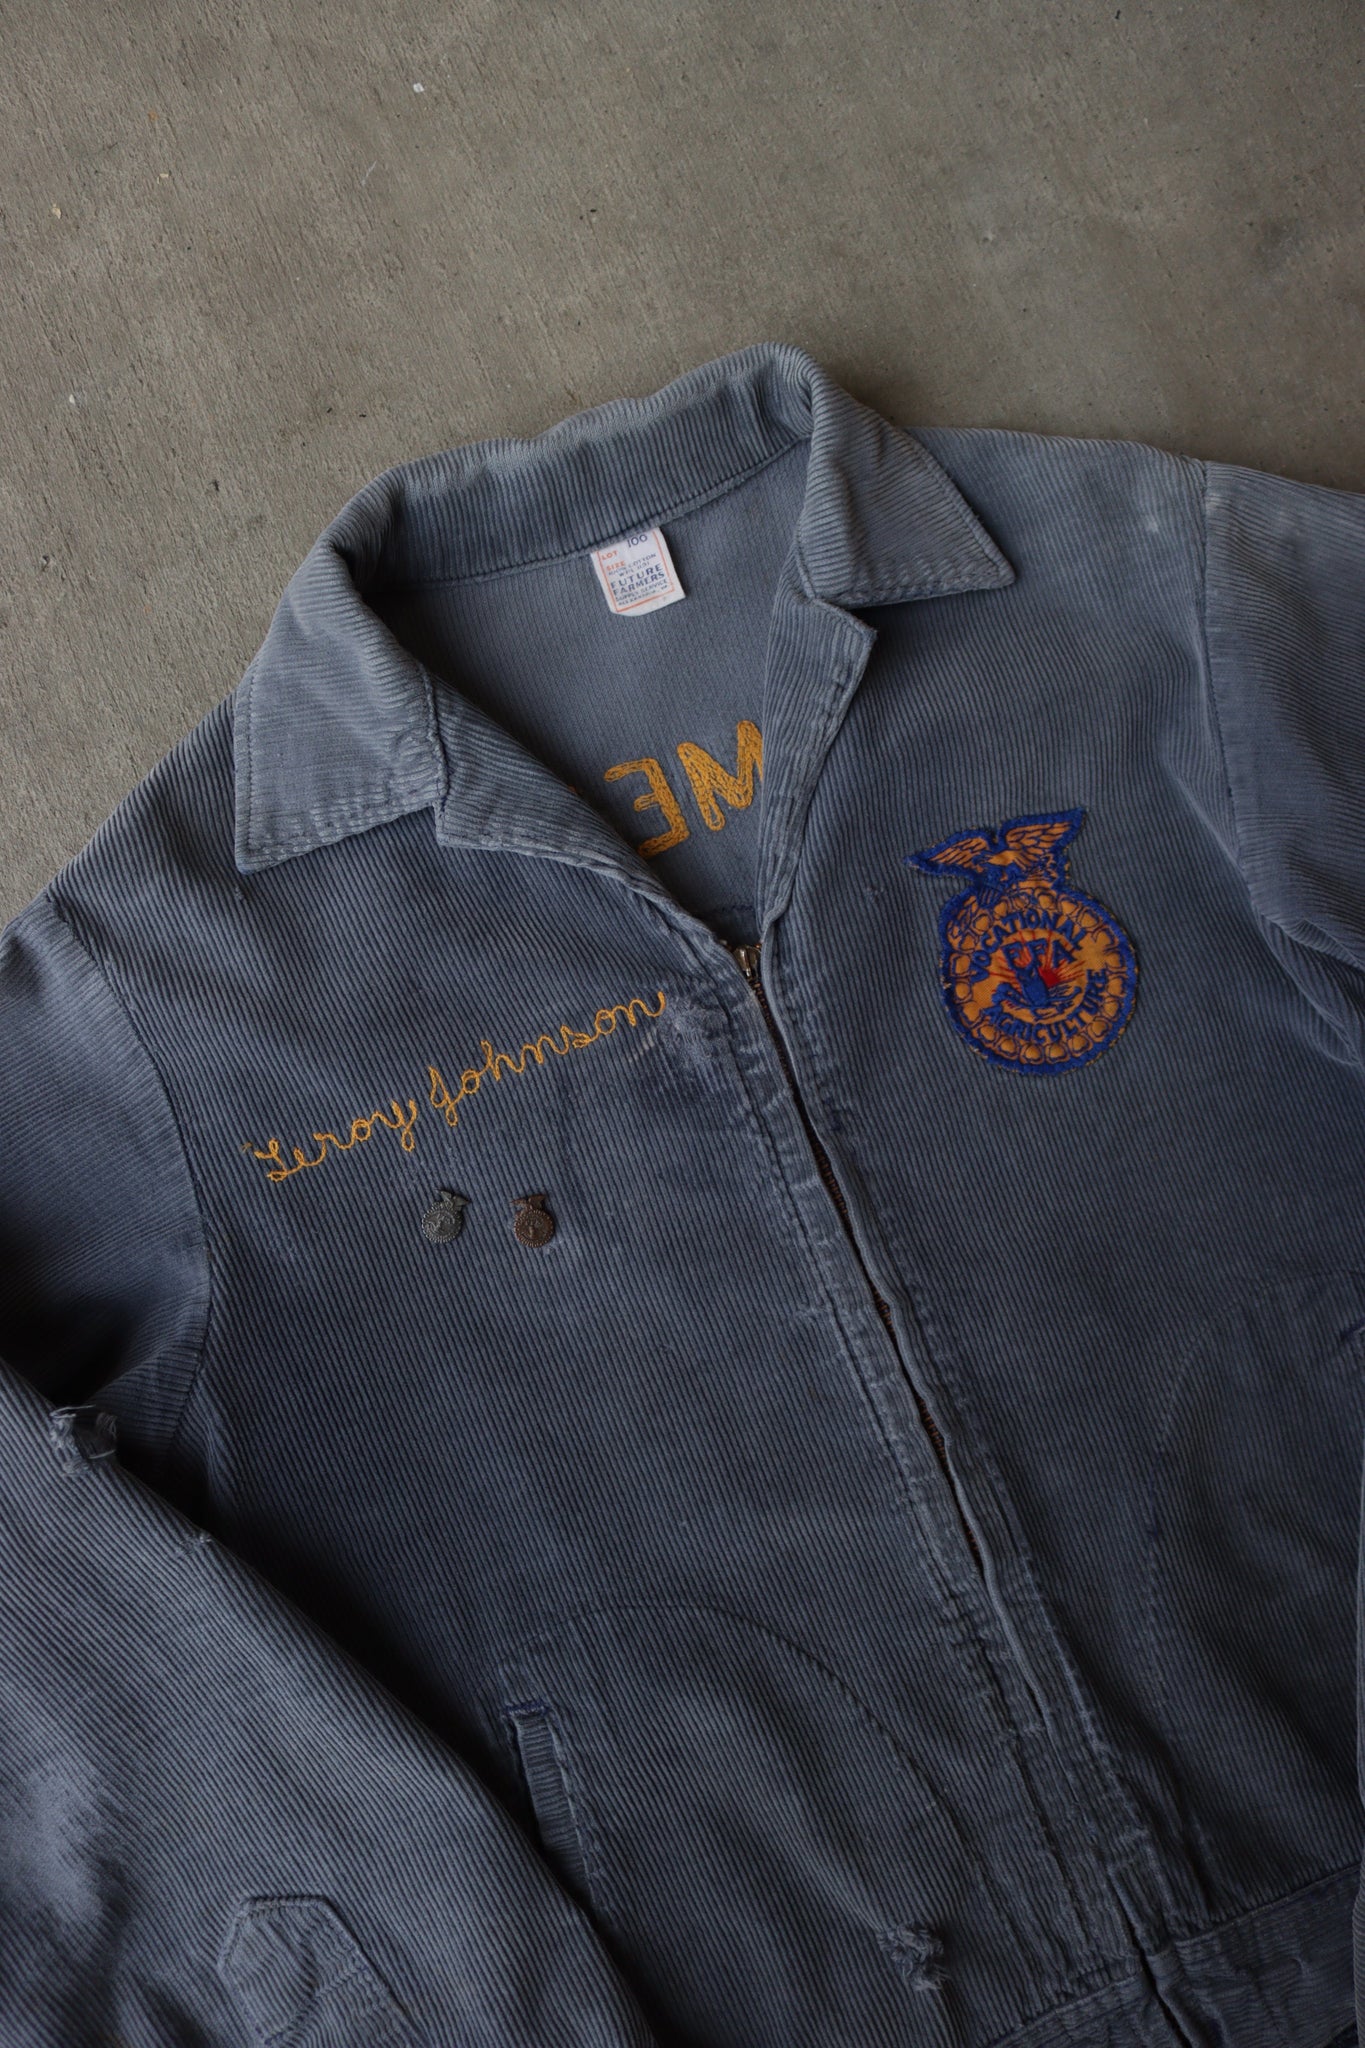 1950s Faded & Repaired Fatigue Blue FFA Chainstitch Jacket - M/L